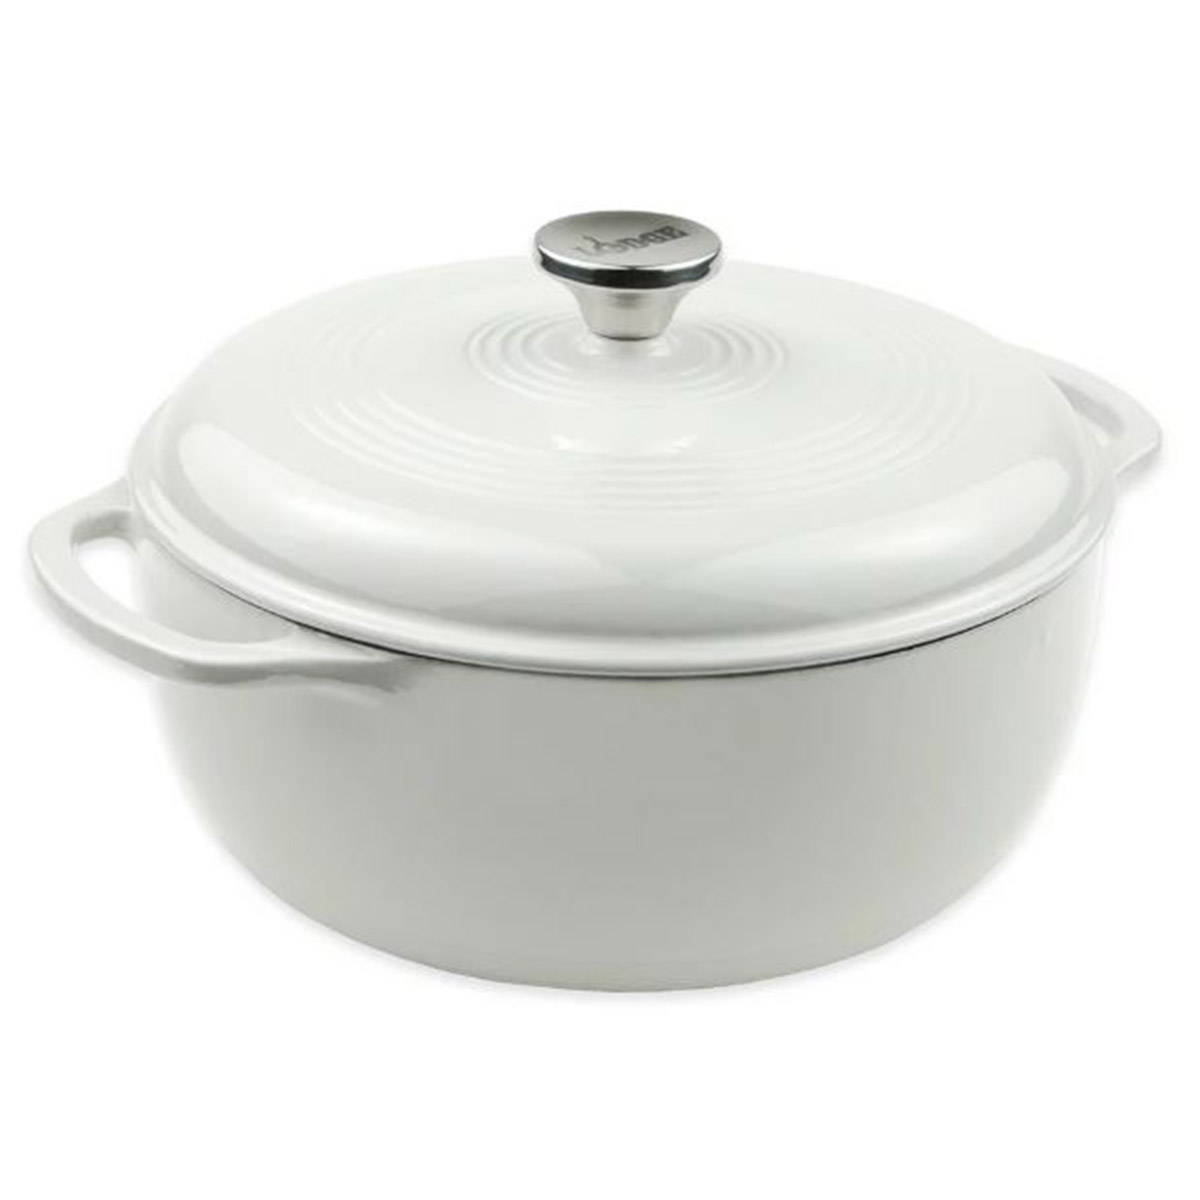 Enamelled Cast Iron Dutch Oven (5,68 lt), White (Oyster) - Lodge®